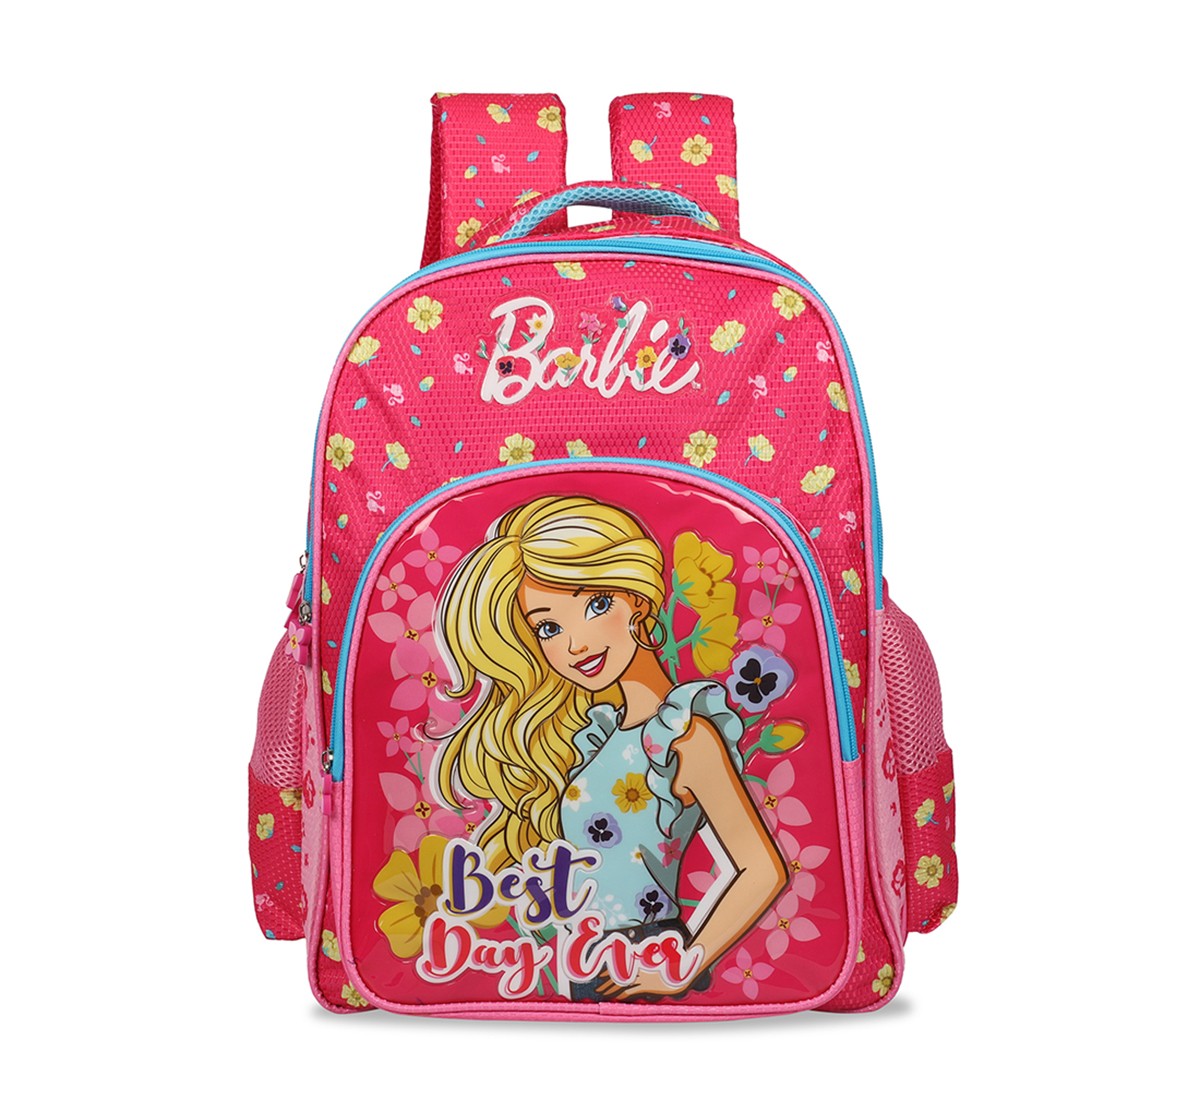 Barbie Barbie Best Day Ever Pink School Bag 46 Cm Bags for age 10Y+ (Pink)